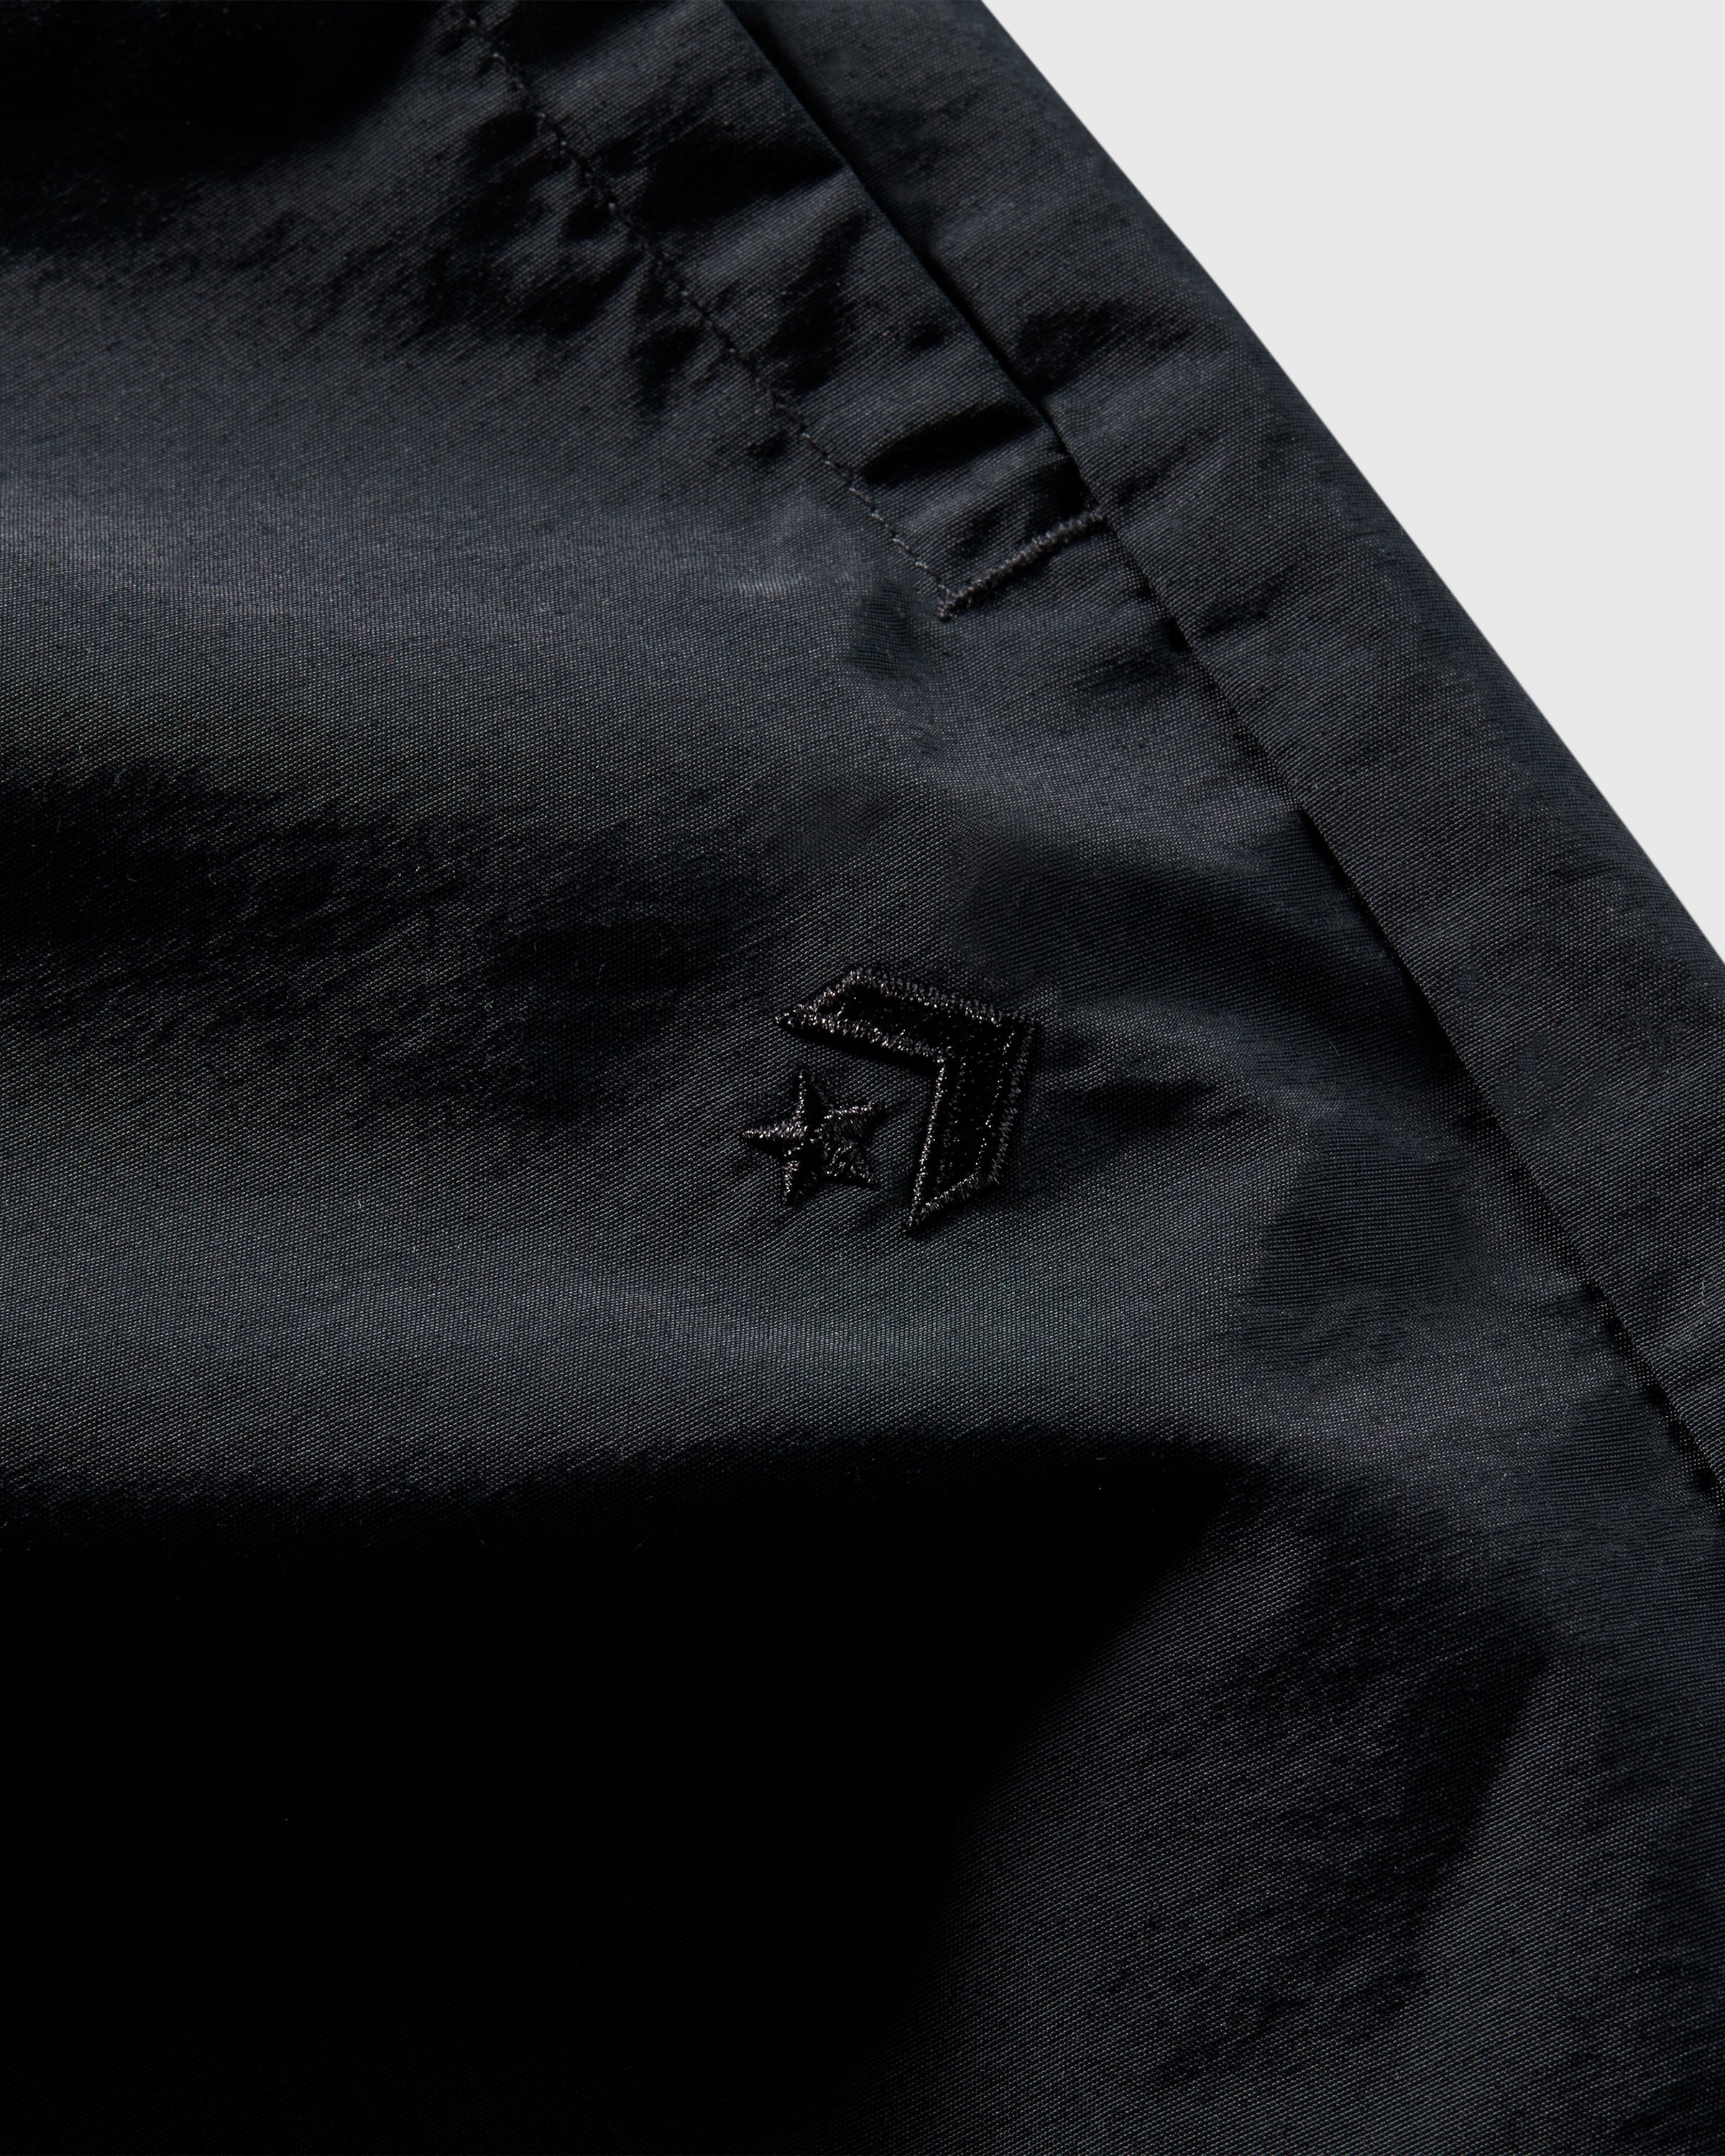 Converse x Barriers – Court Ready Cutter Shorts Black - Shorts - Black - Image 5